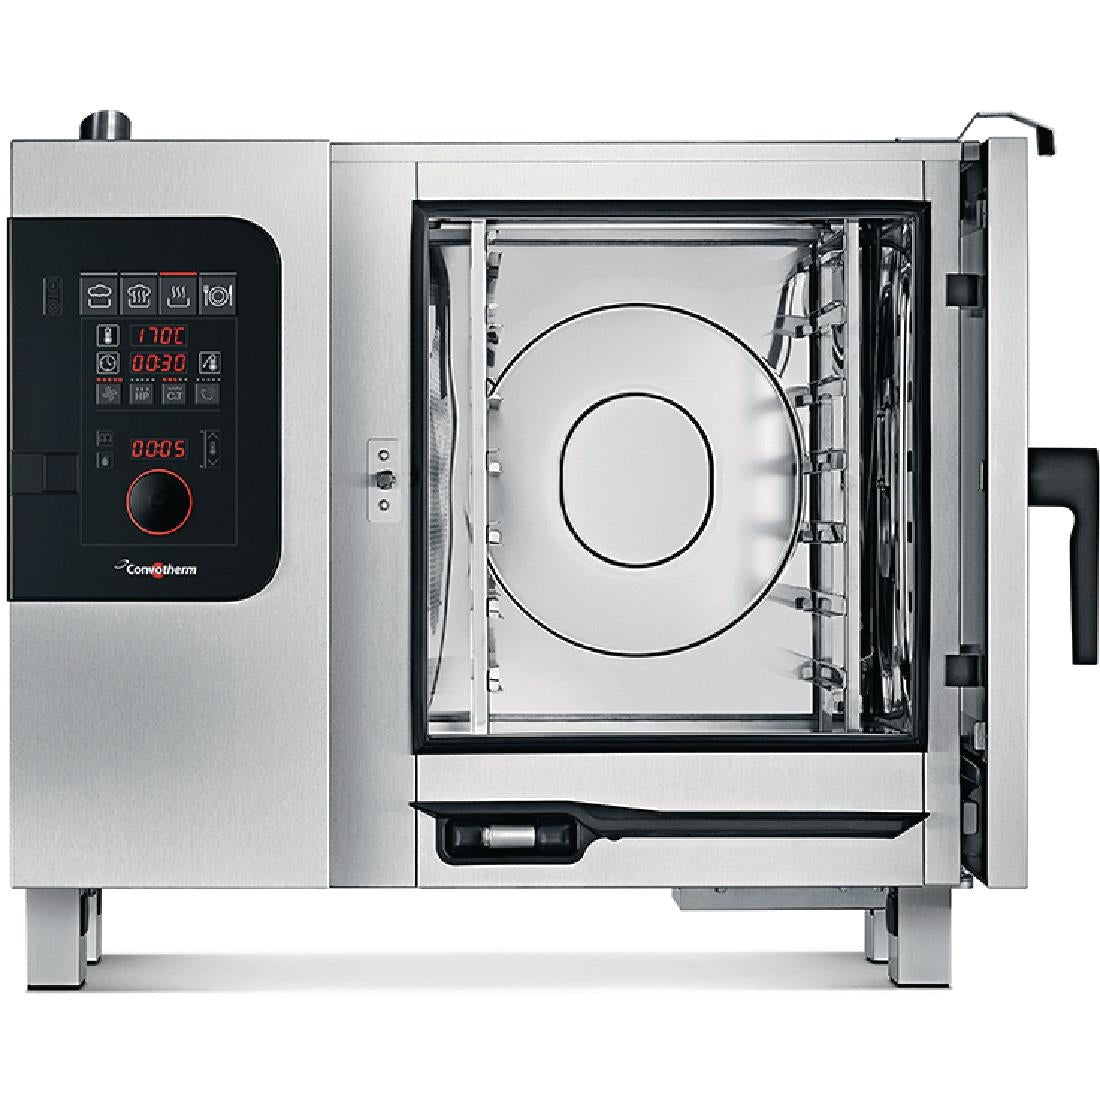 DR442-MO Convotherm 4 easyDial Combi Oven 6 x 1 x1 GN Grid JD Catering Equipment Solutions Ltd